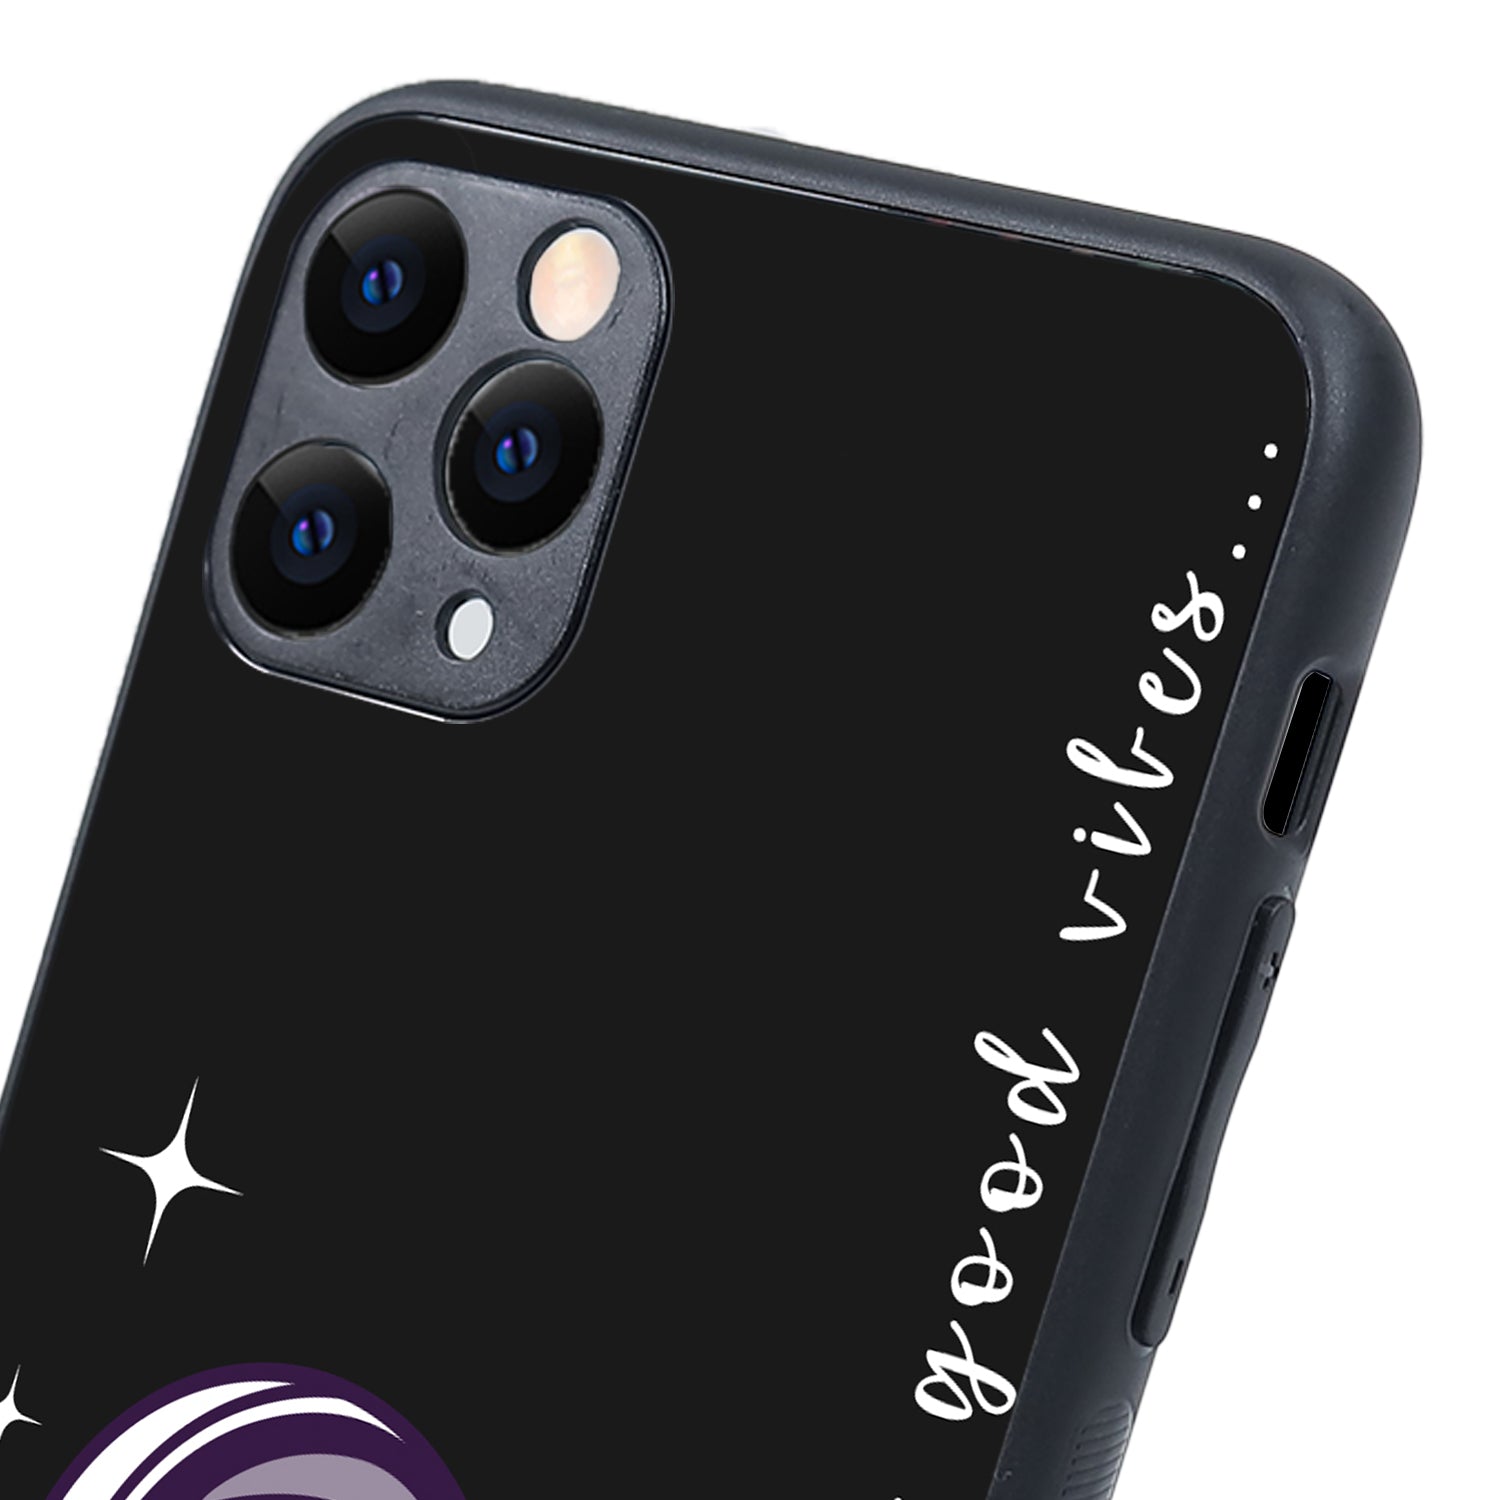 Spending Good Vibes Bff iPhone 11 Pro Max Case